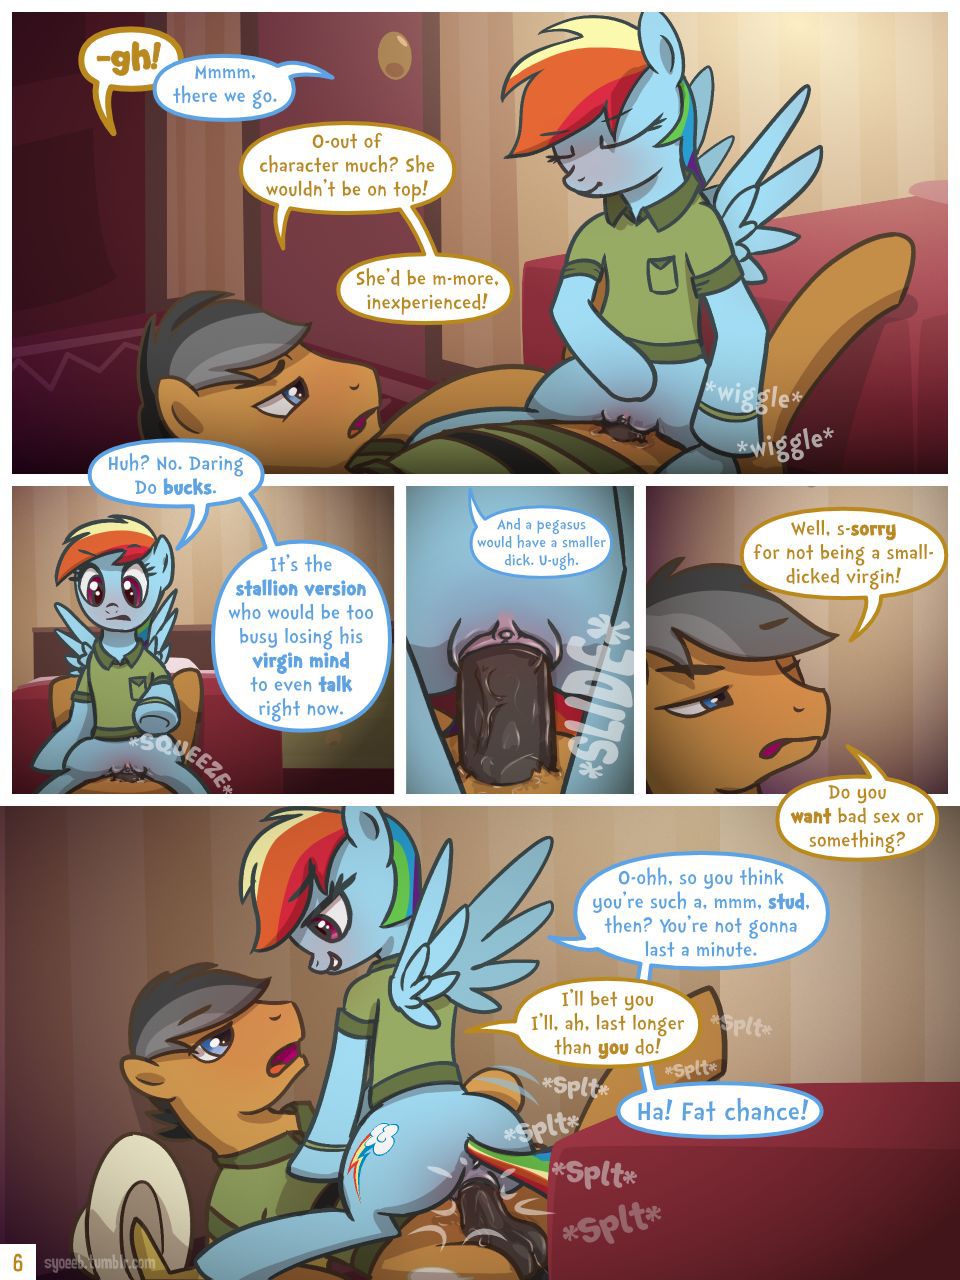 MLP FiM - Feud of the Fanatics by SyoeeB (Complete) 6